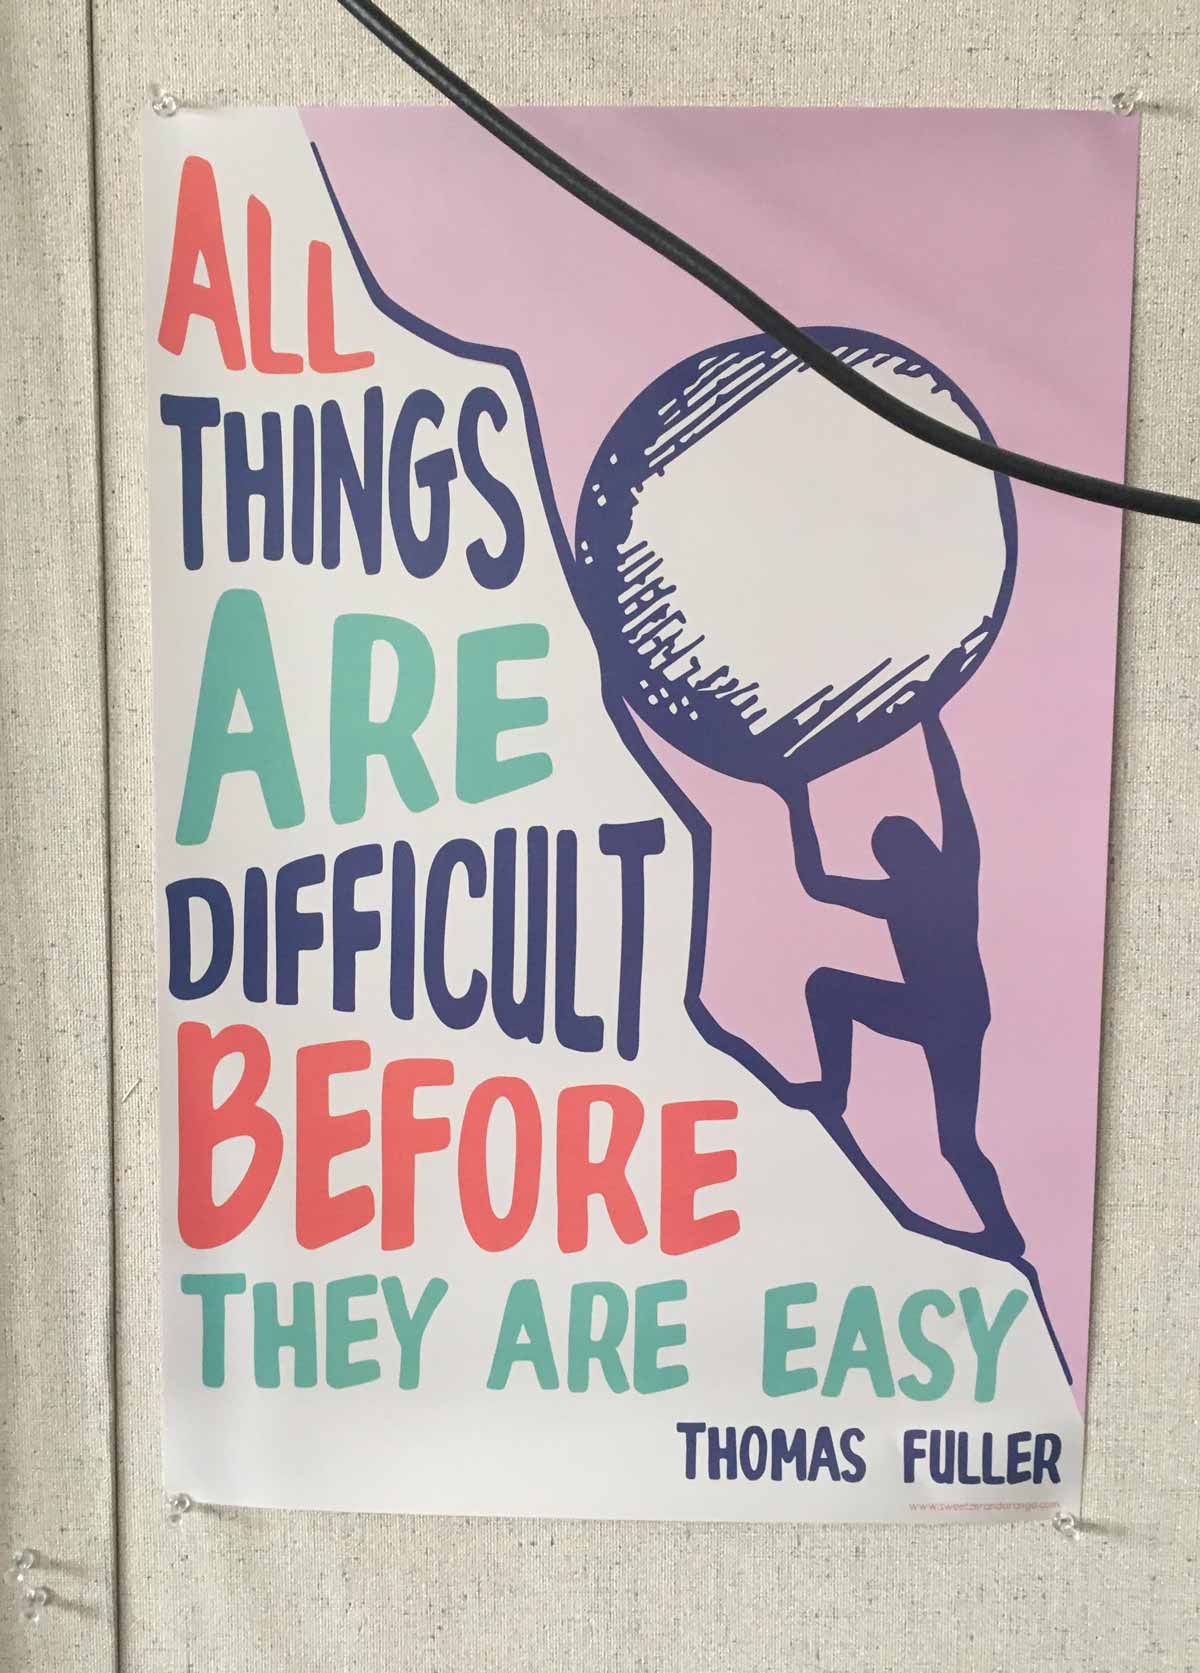 Maybe Sisyphus wasn’t the best example for this poster